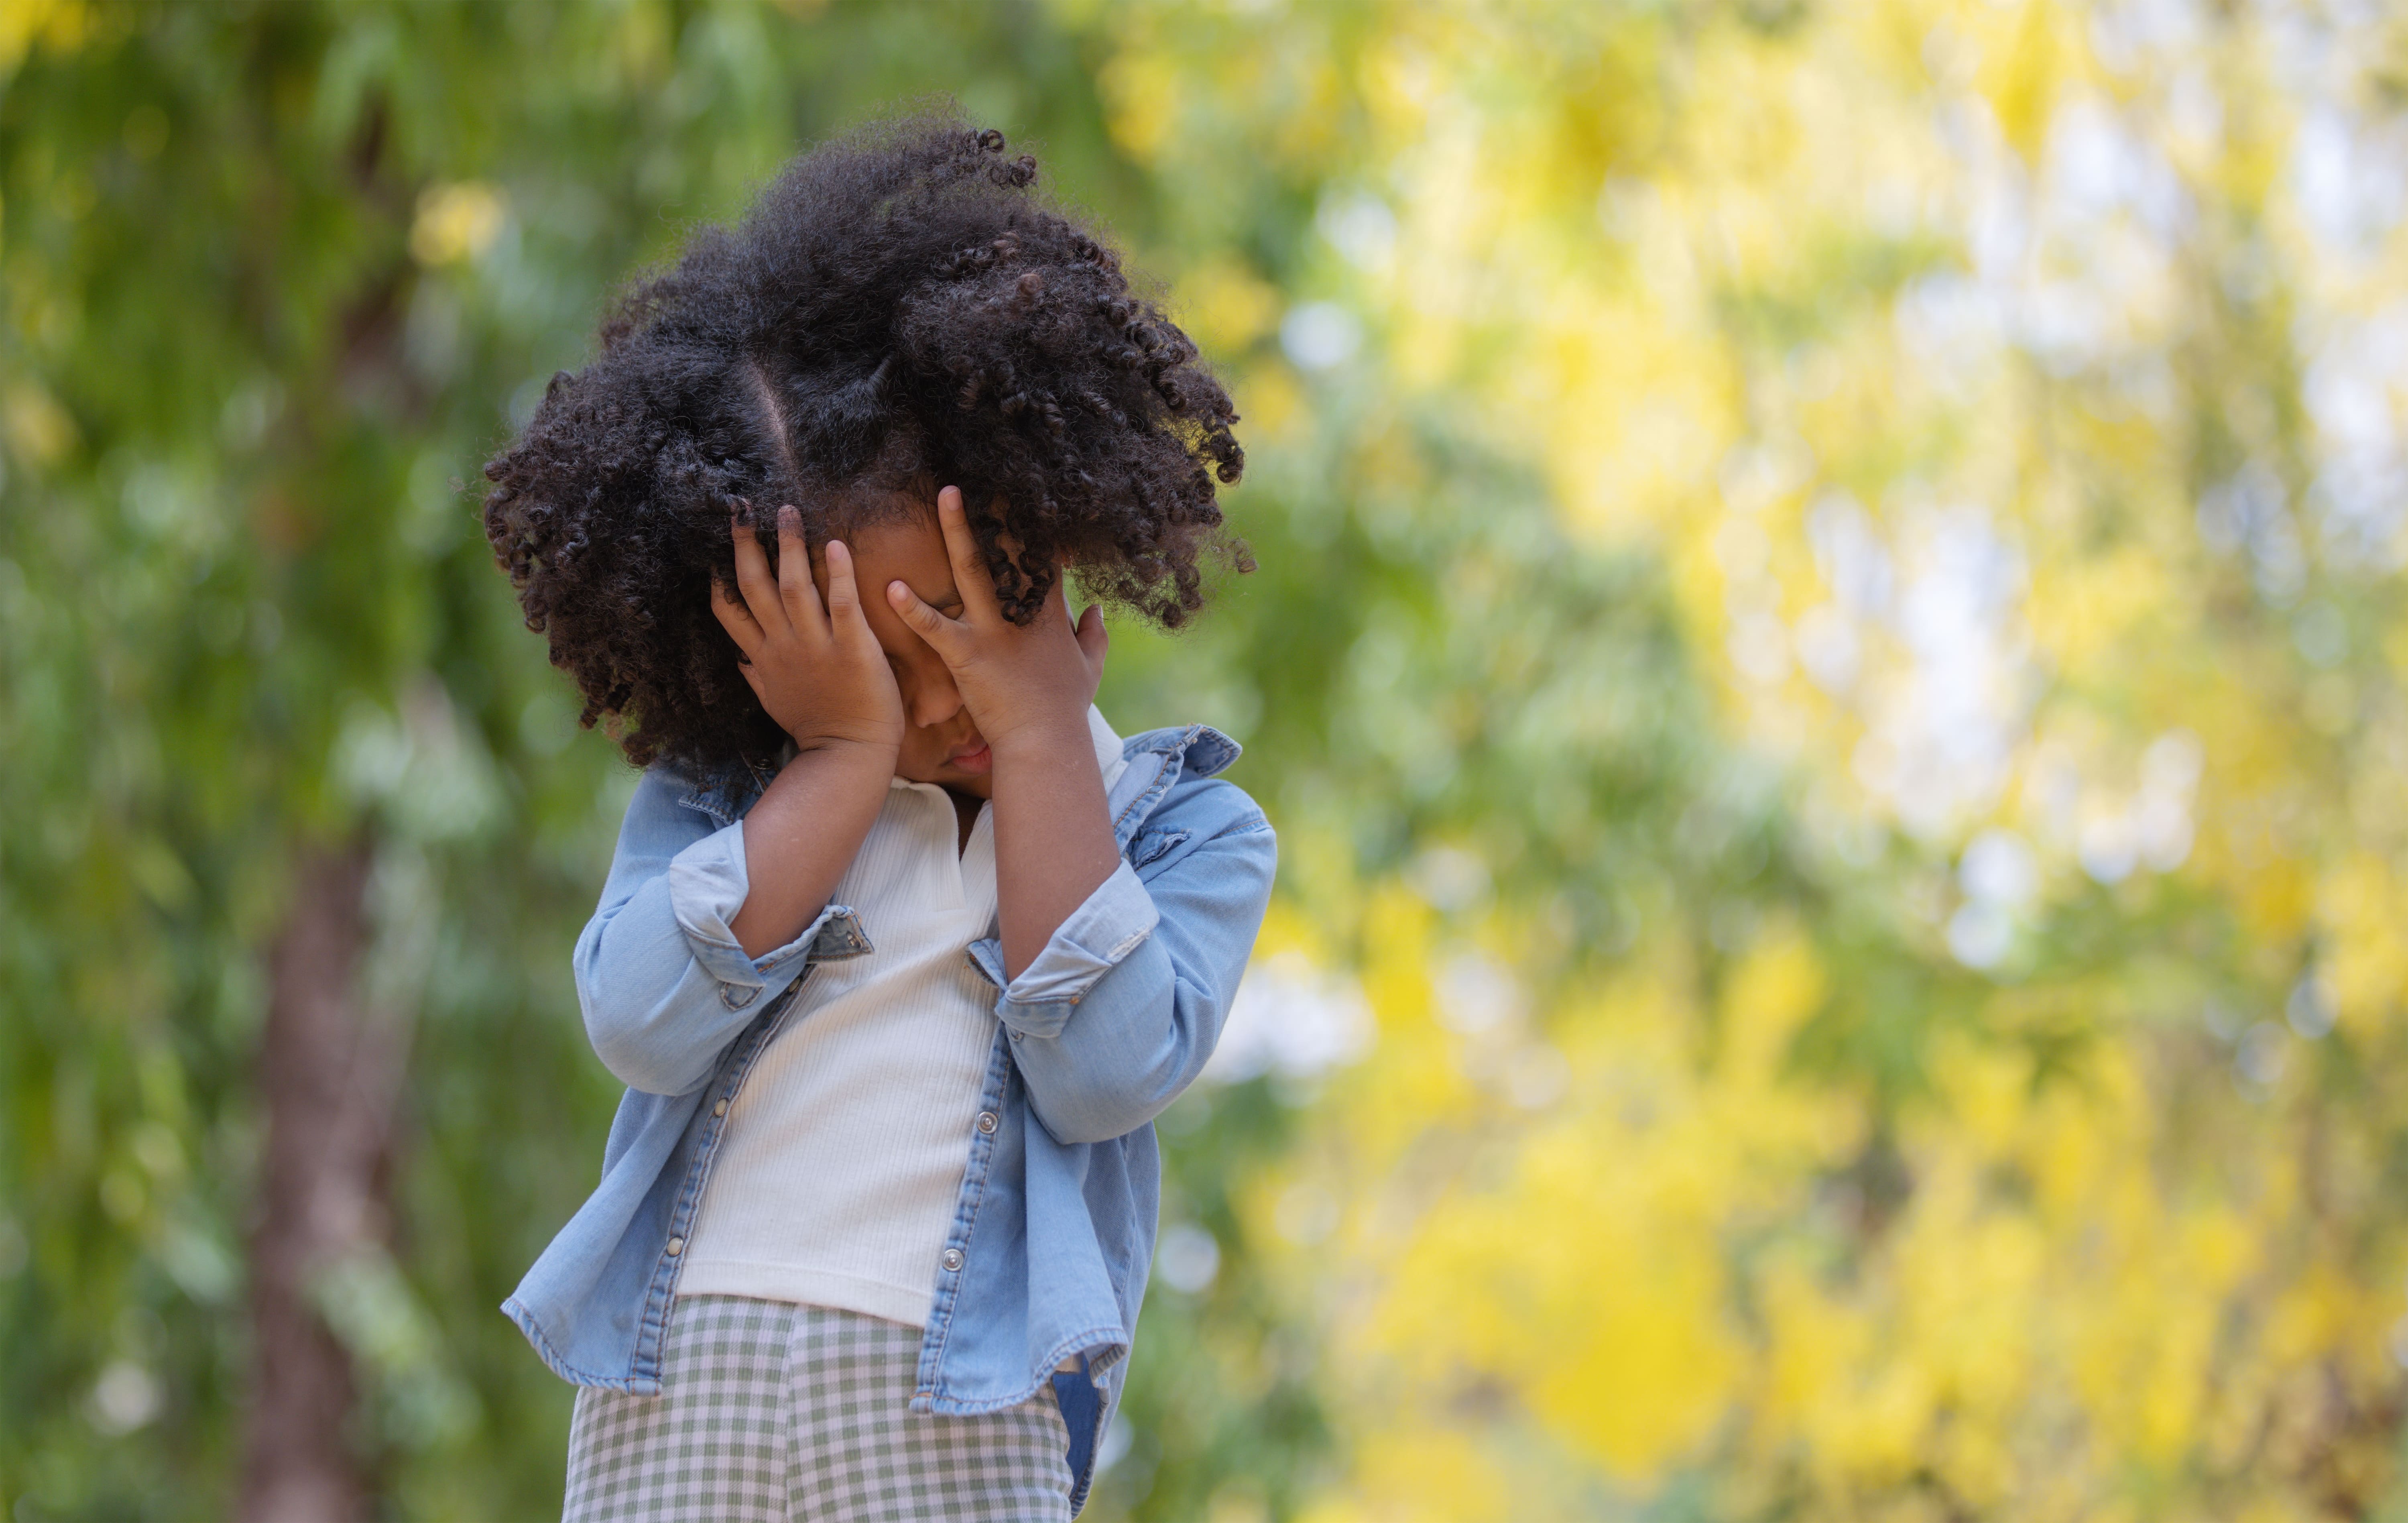 A young girl hiding behind her hands out of stress or fear. Try positive affirmations to support mental health.